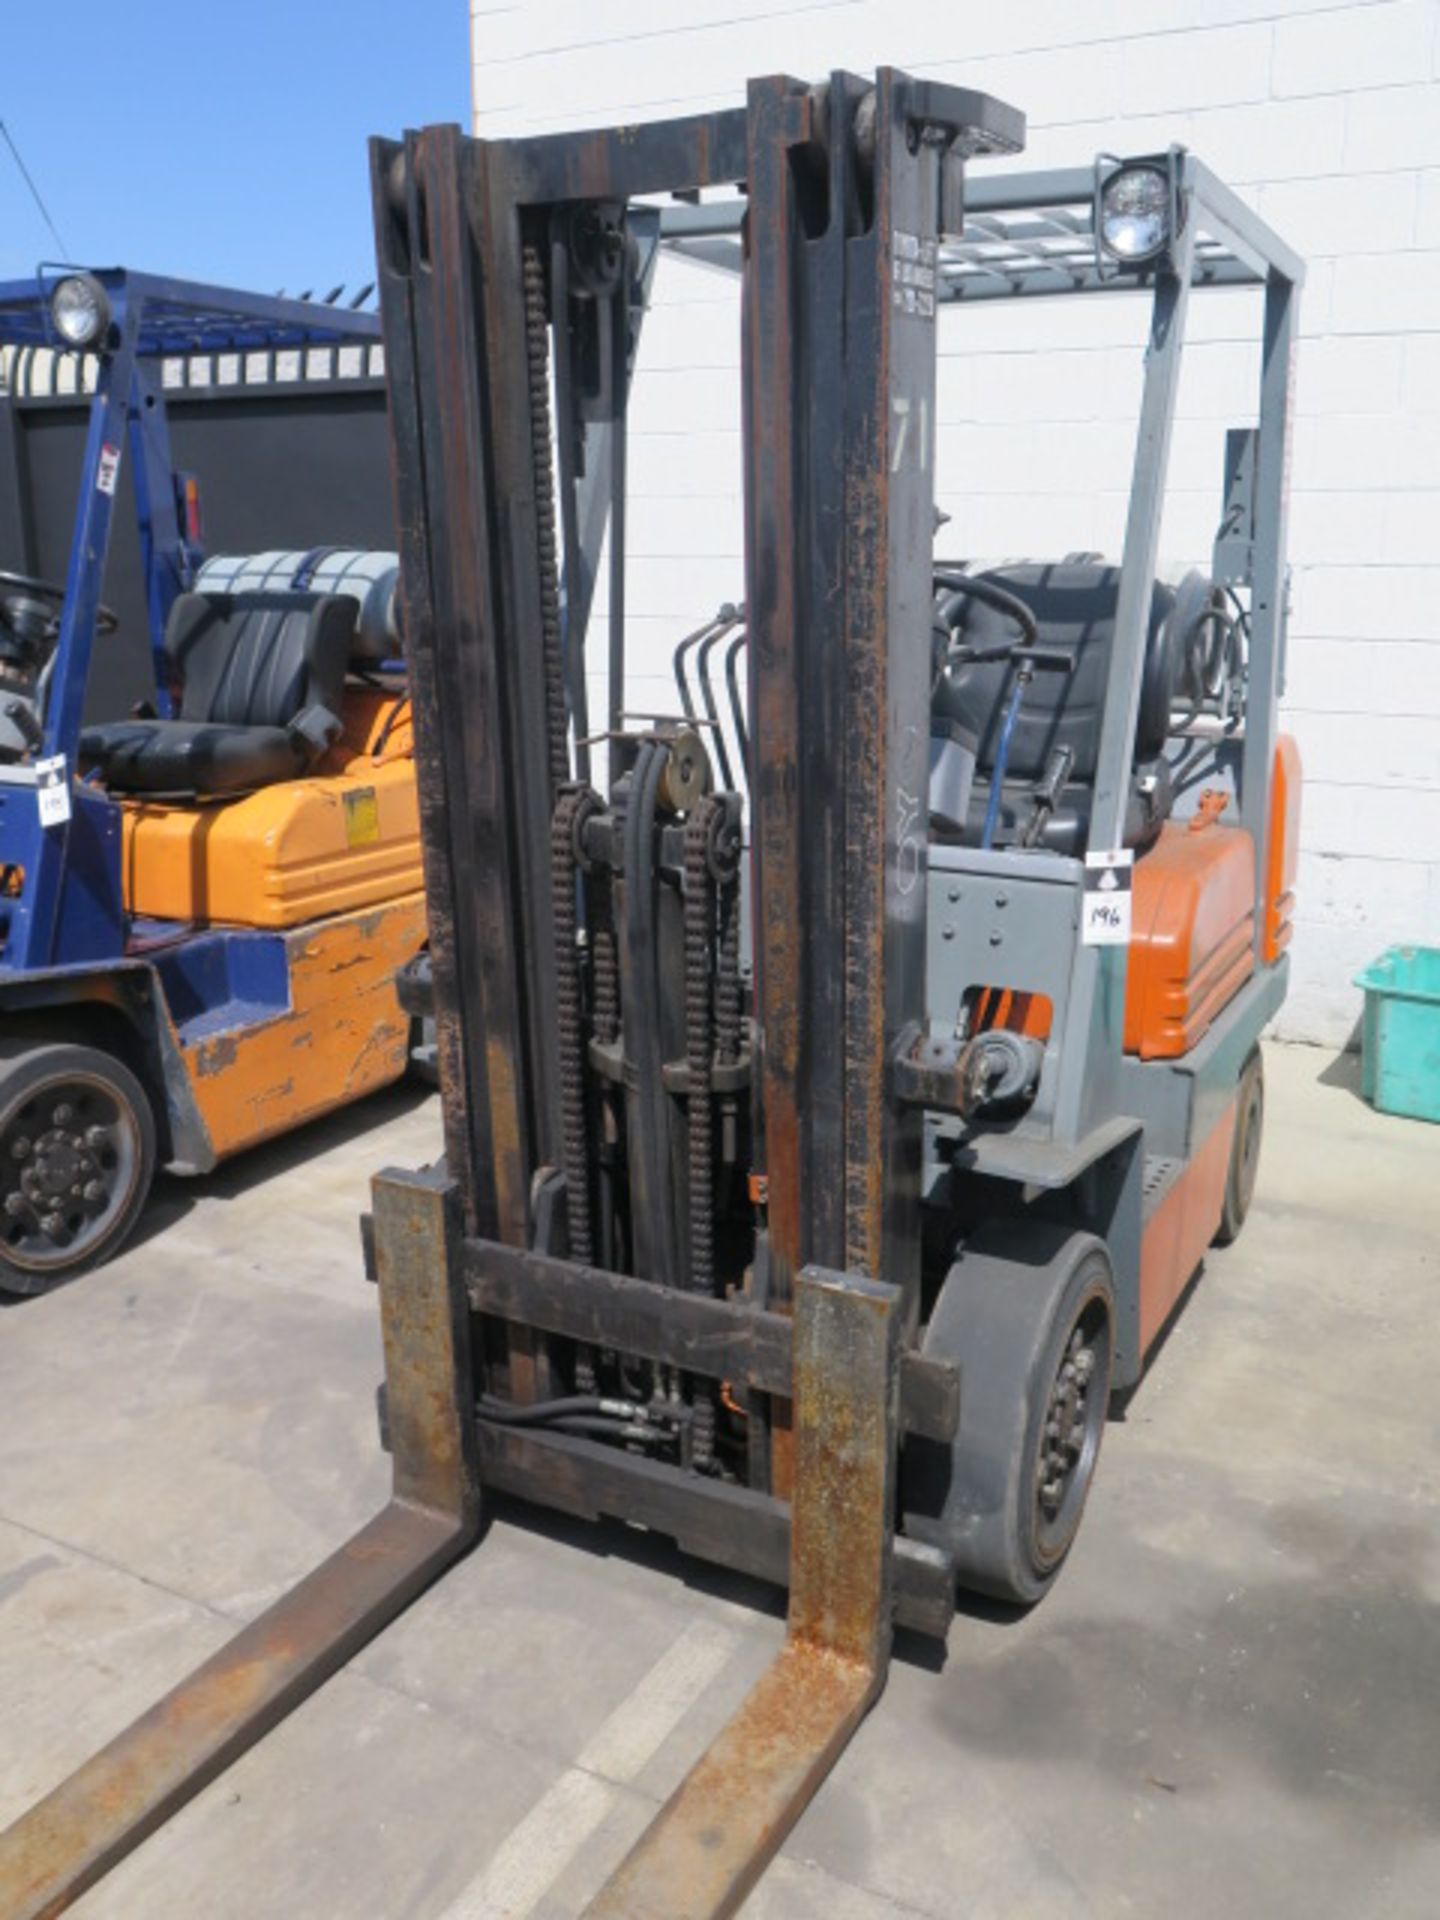 Toyota 5FGC25 5000 Lb Cap LPG Forklift s/n 5FGCU25-84777 w/ 3-Stage Mast, 169" Lift Height, - Image 5 of 12